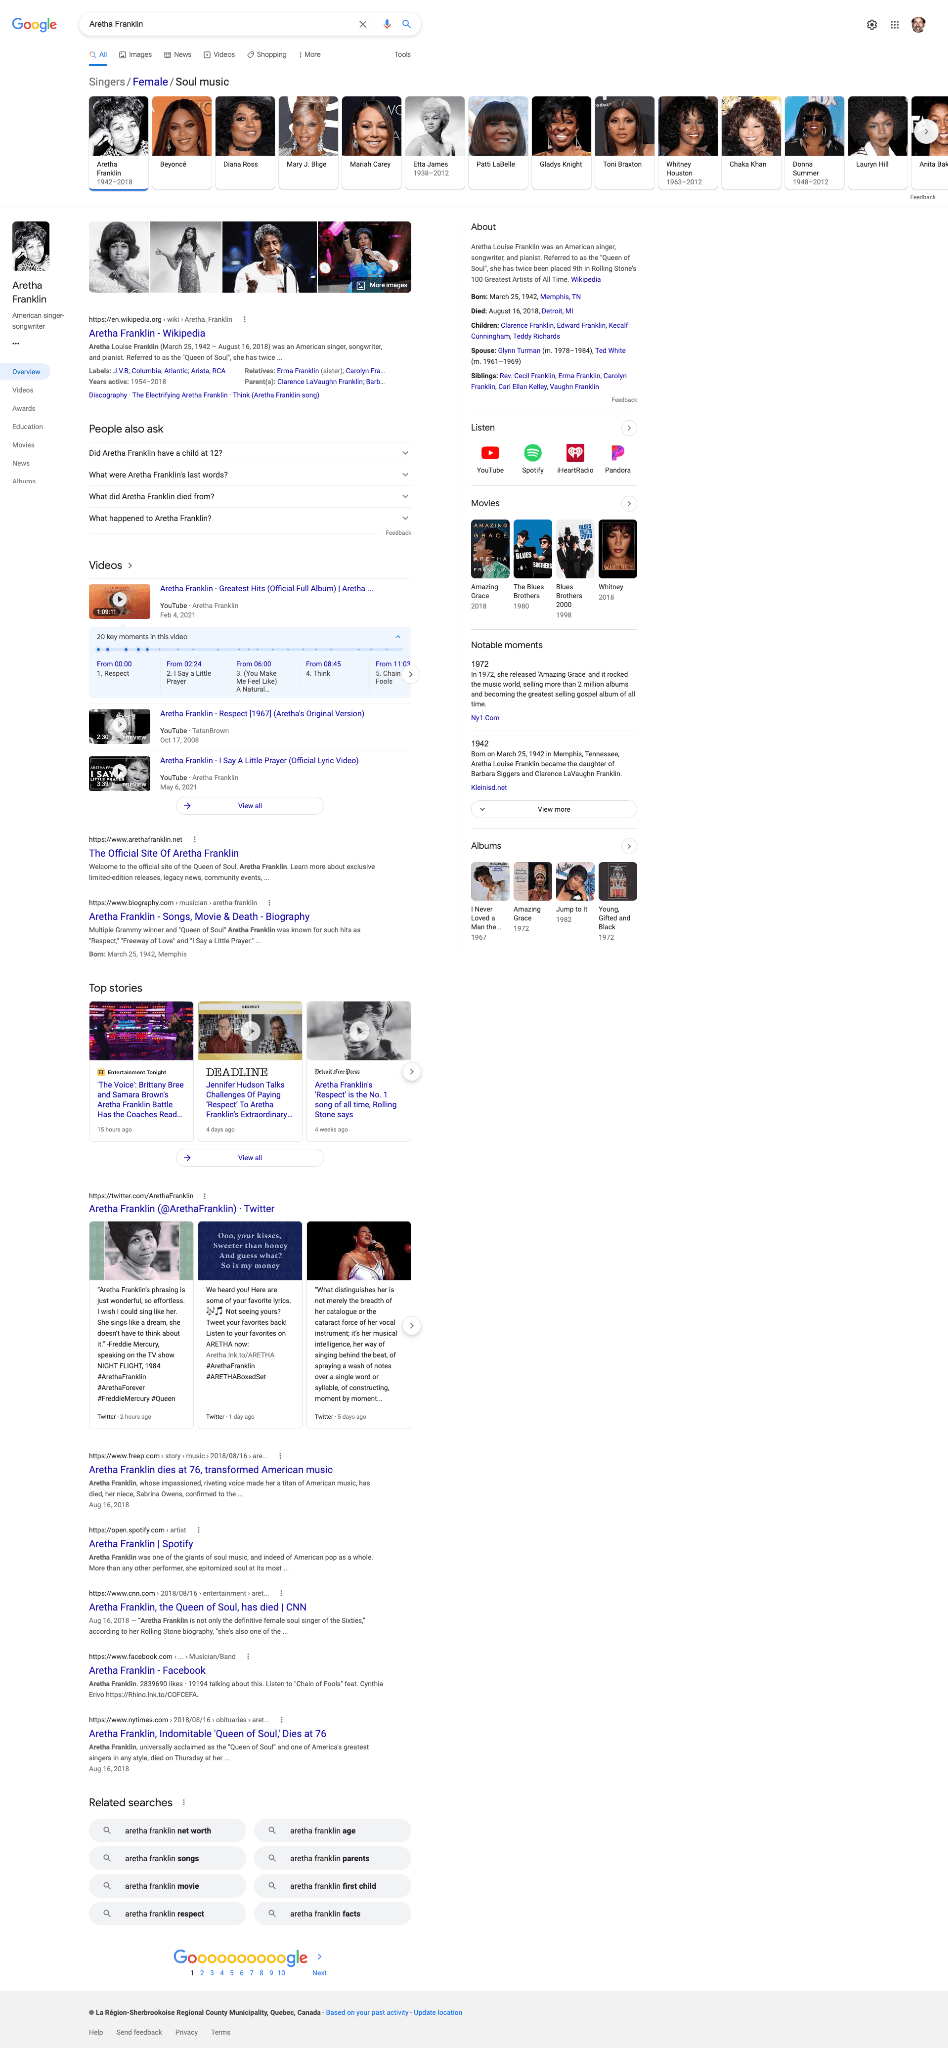 Google SERP for Aretha Franklin based on interaction with previous search term, “famous american soul singers female.” 